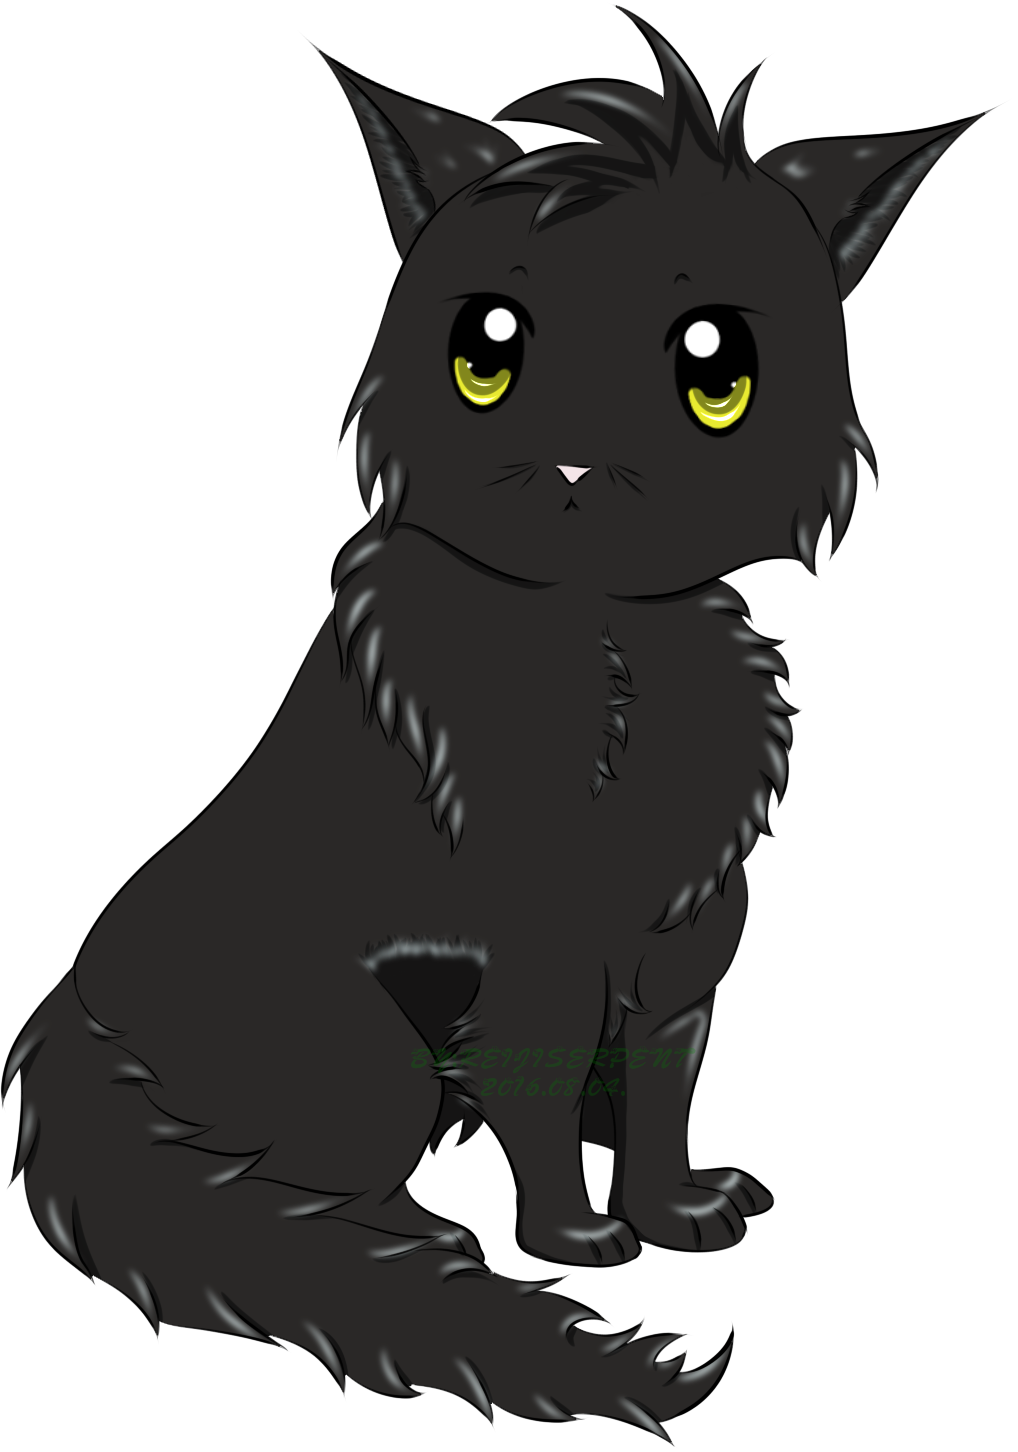 Anime Cat PNG Image Background